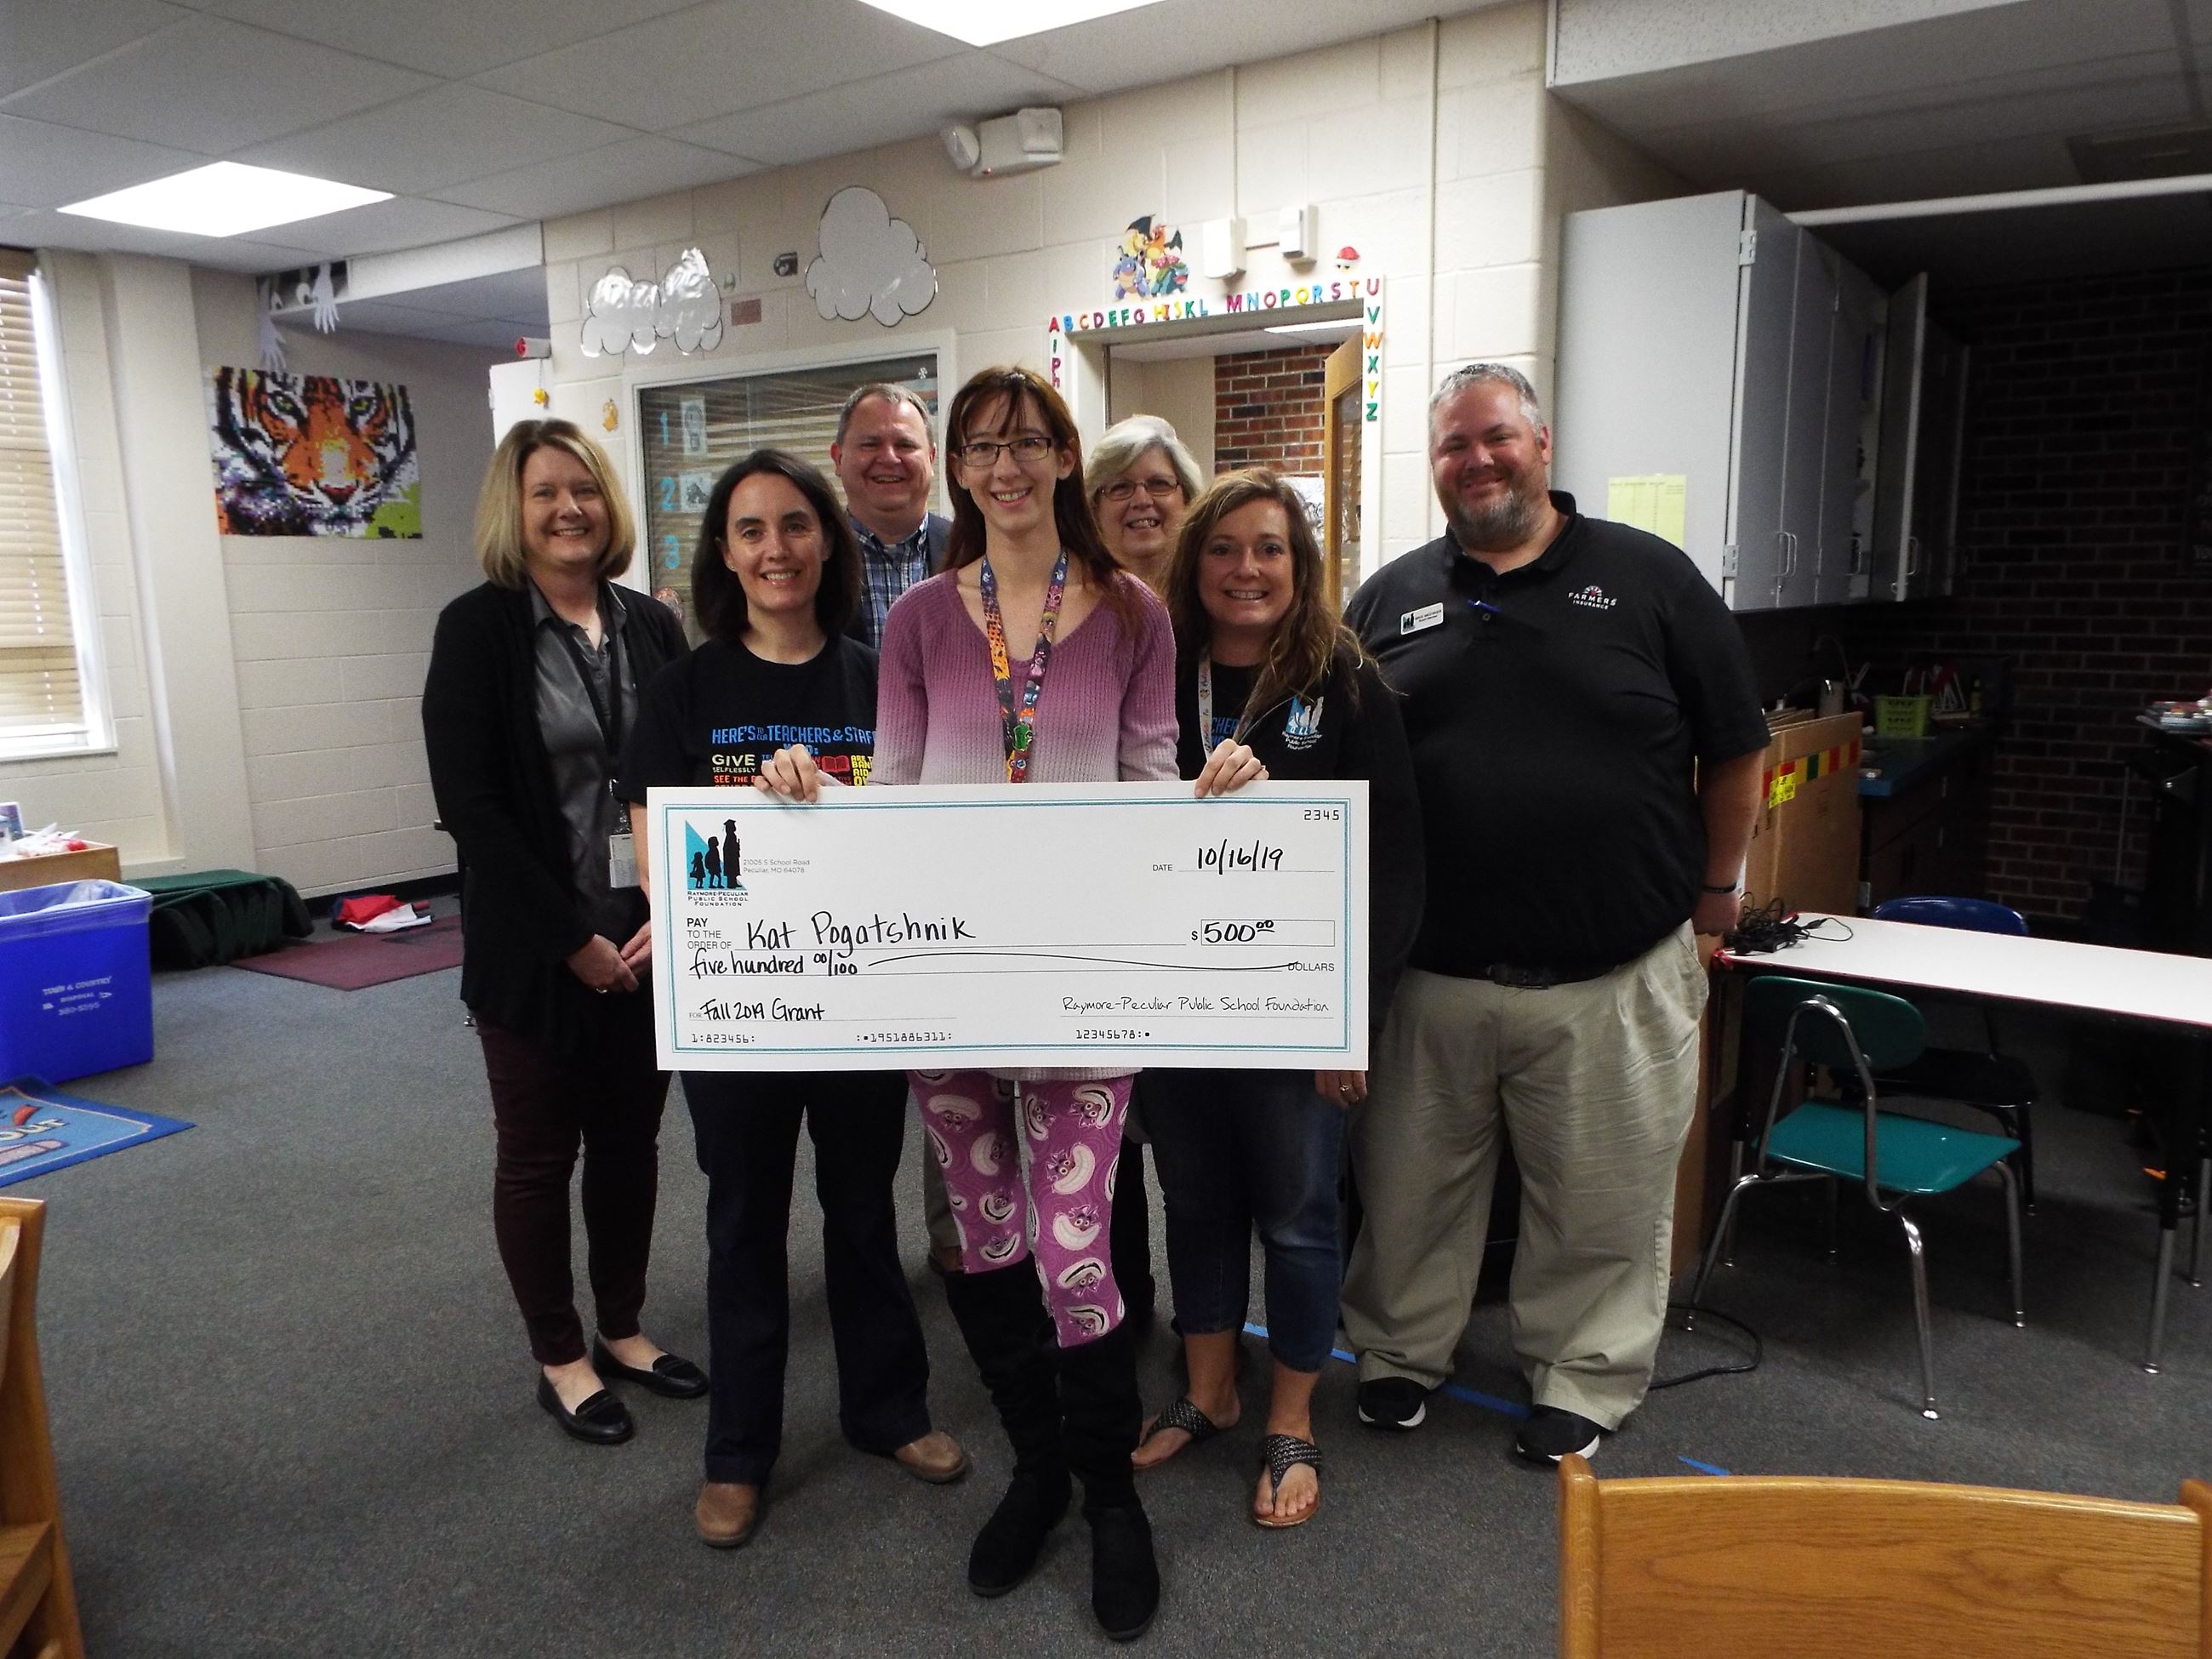 Raymore Elementary Library Media Specialist Kat Pogatshnik received a $500 grant to pay for a visit by a children's book author.